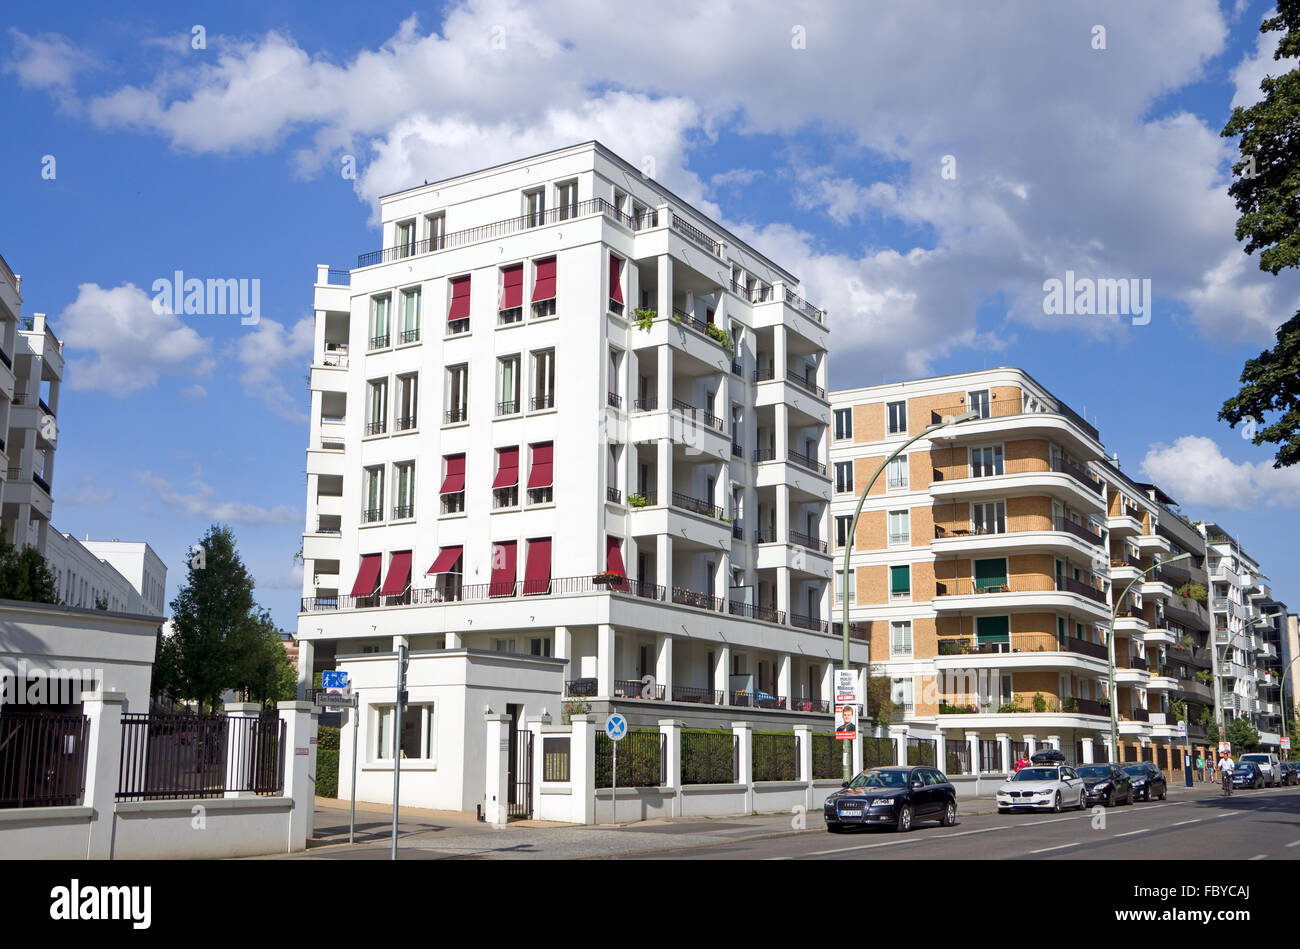 Berlin town houses Stock Photo